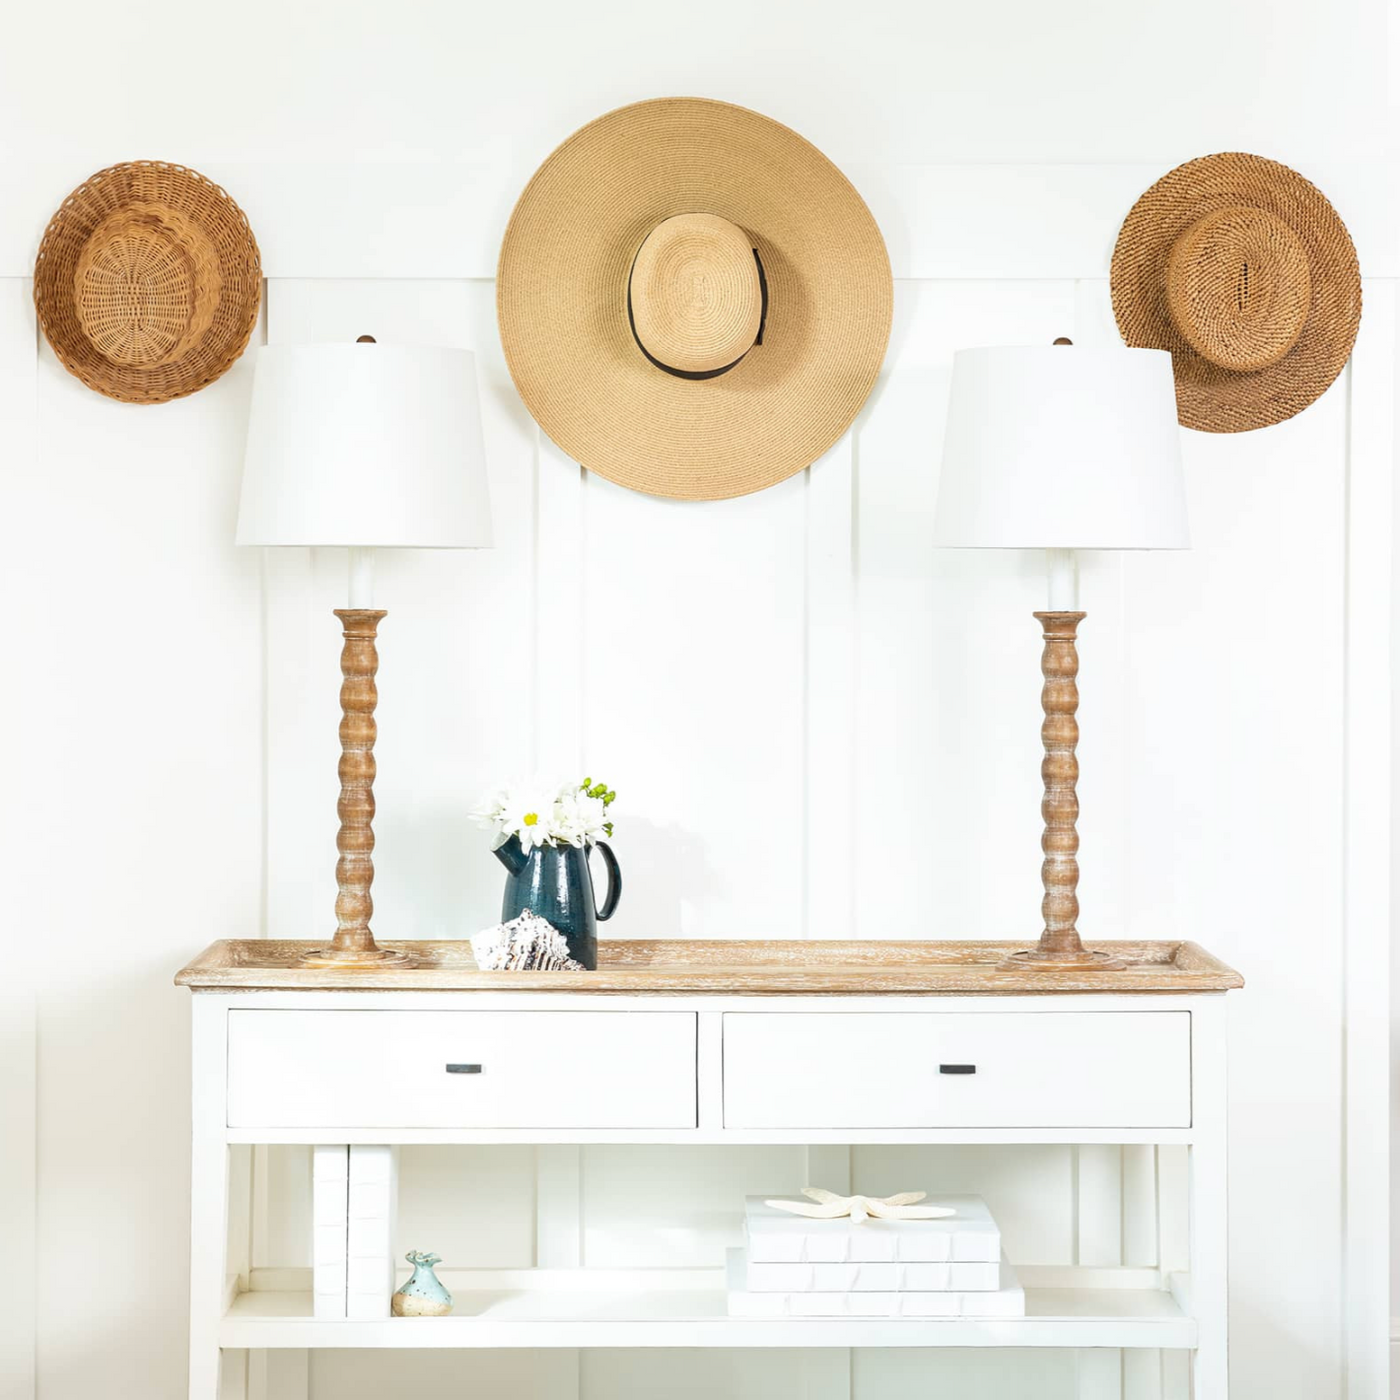 Perennial Buffet Table Lamp in White | Newport Lamp And Shade | Located in Newport, RI